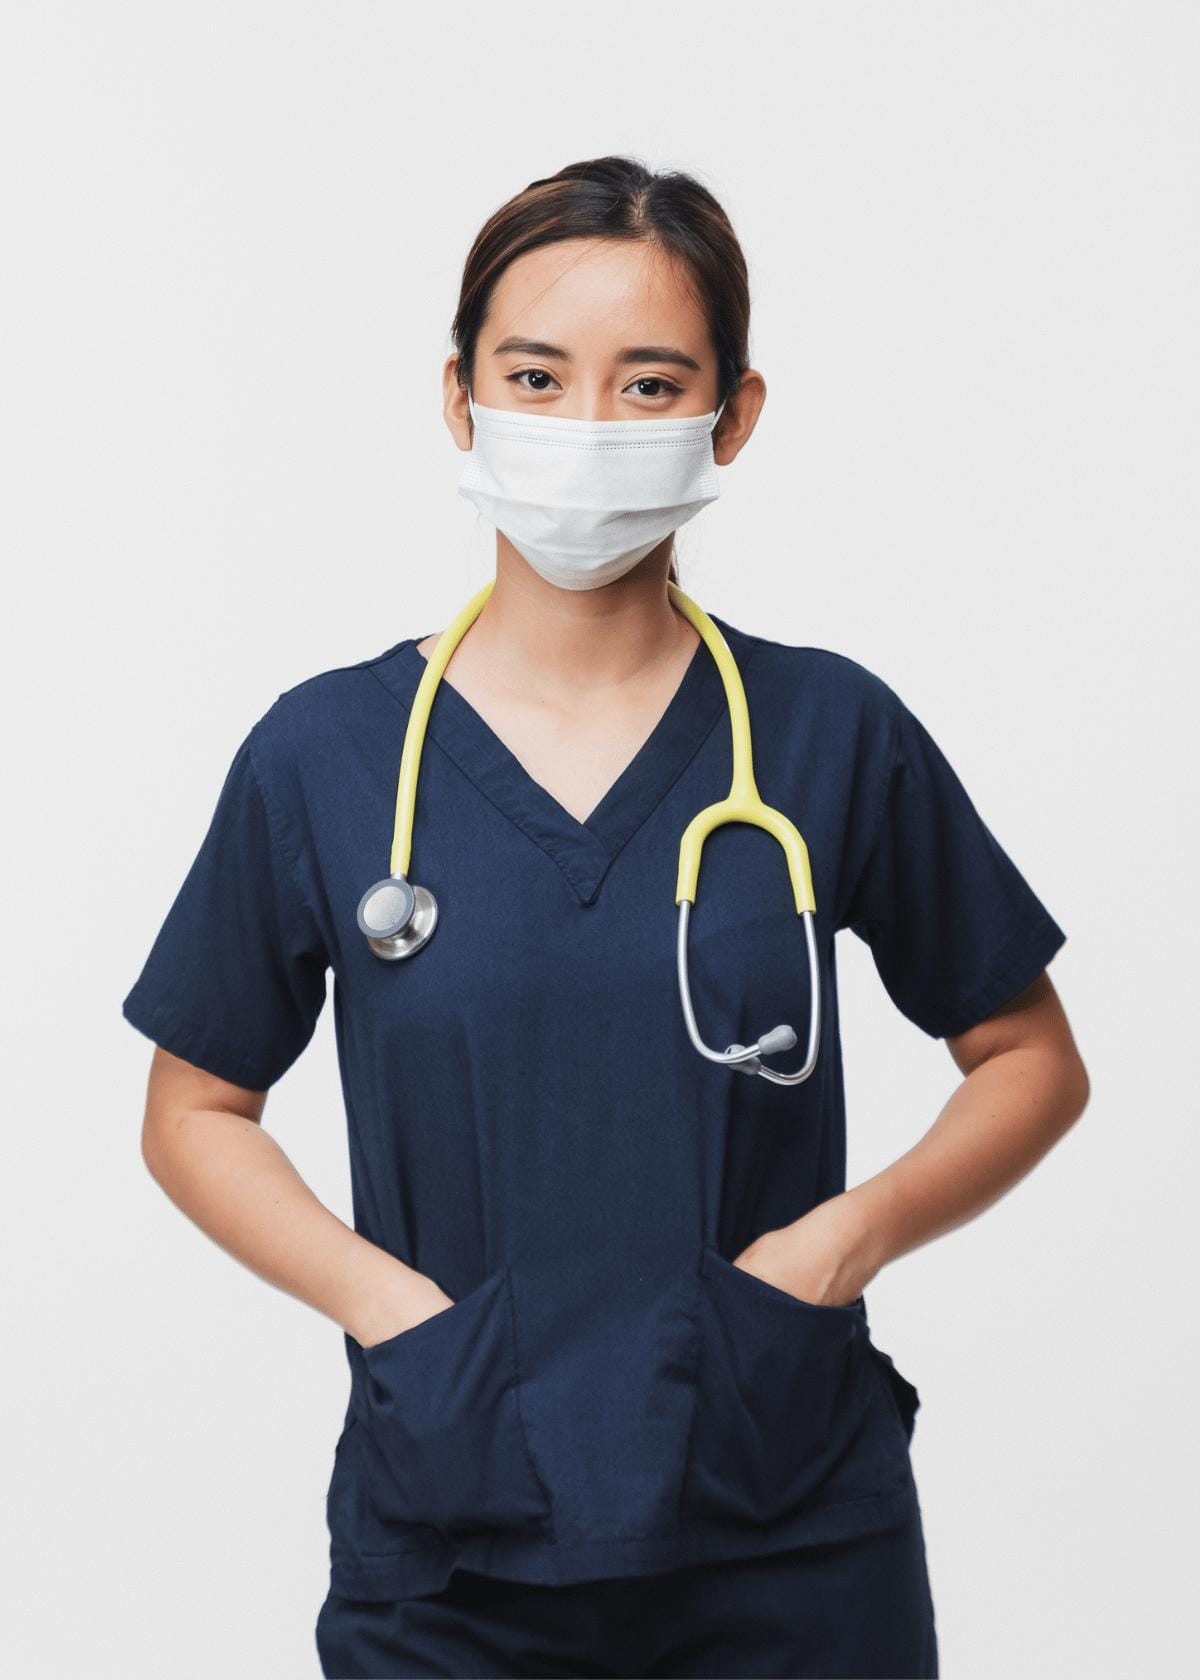 Fit to Flatter: A Guide to the Best Scrubs for Curvy Women in the Medical Field